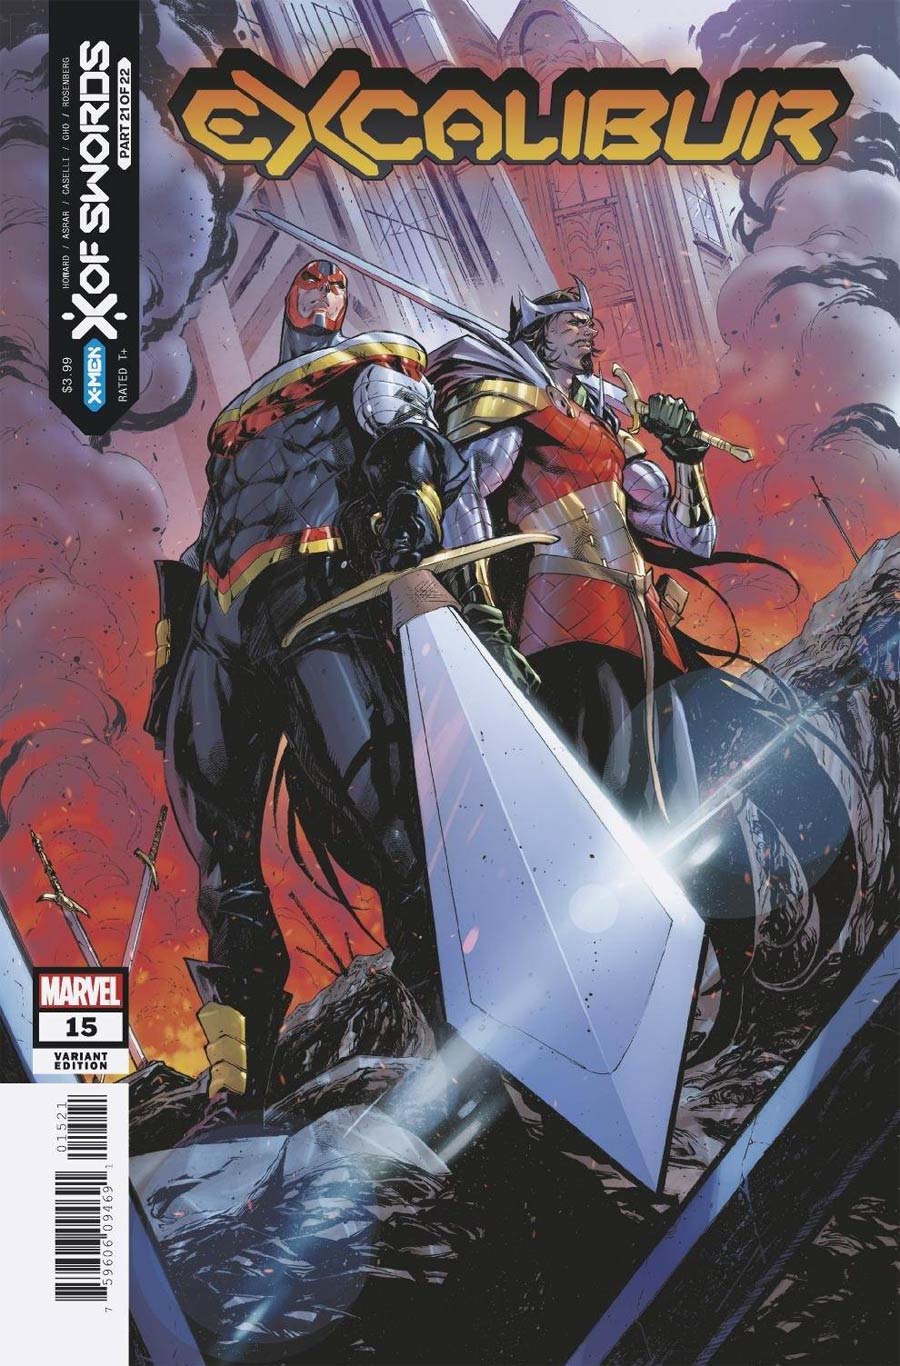 Excalibur Vol 4 #15 Cover B Variant Iban Coello Cover (X Of Swords Part 21)